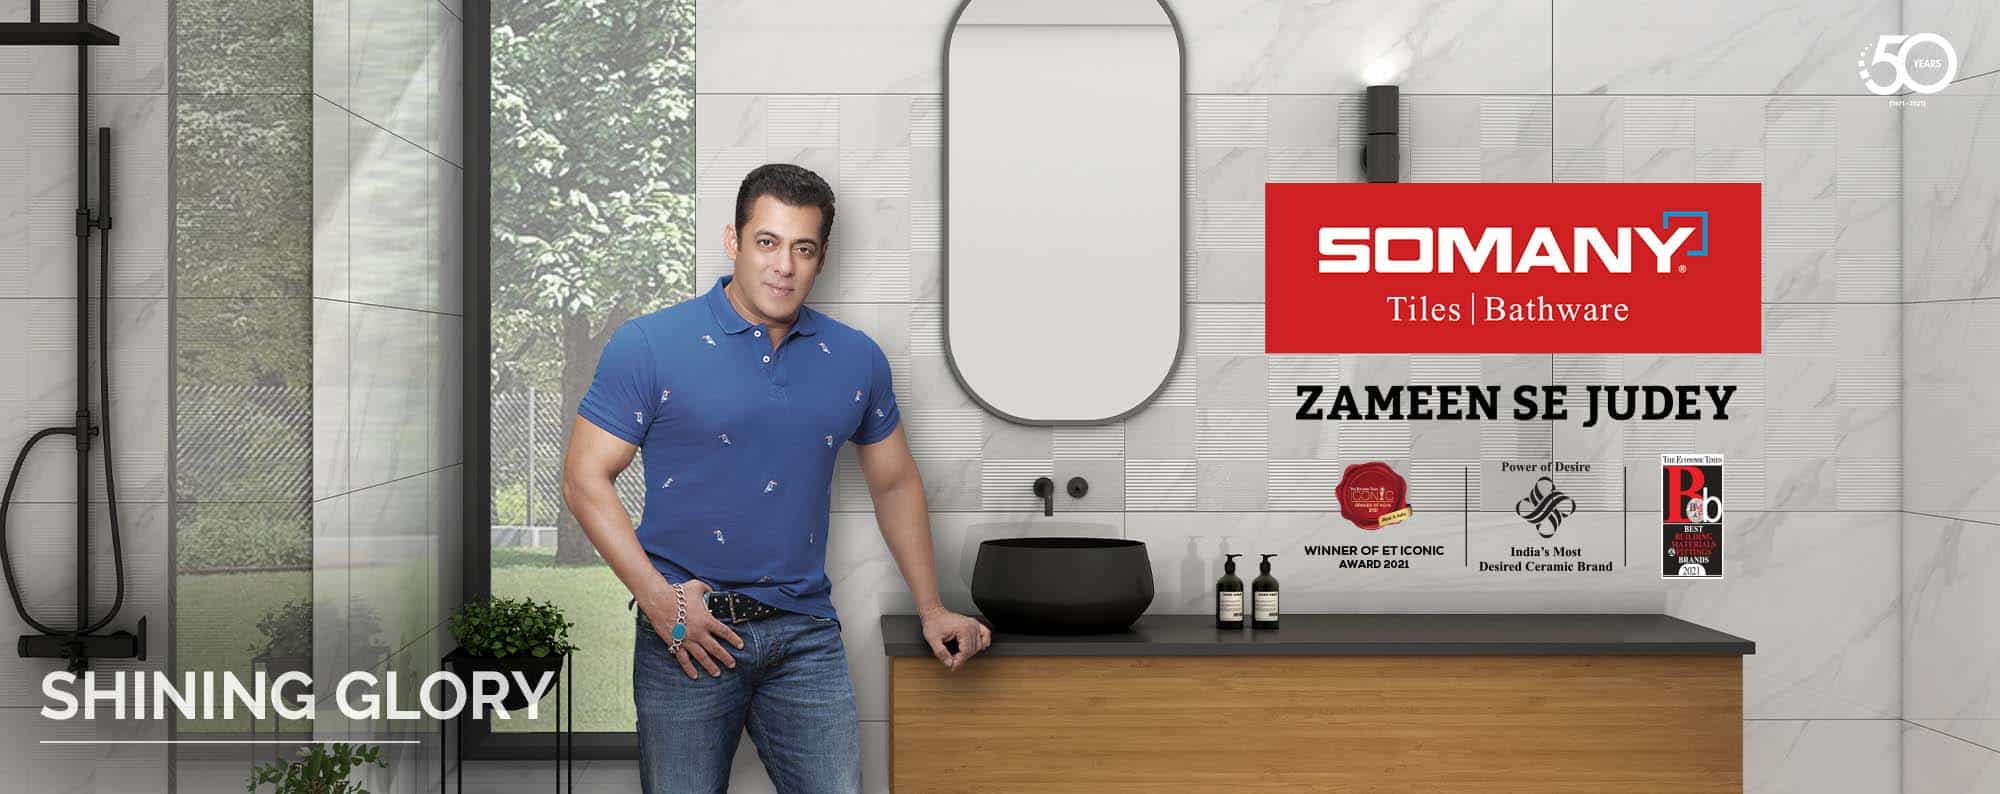 Somany company banner in beige colour with Salman Khan, this company is among one of the best tile manufacturing companies in India